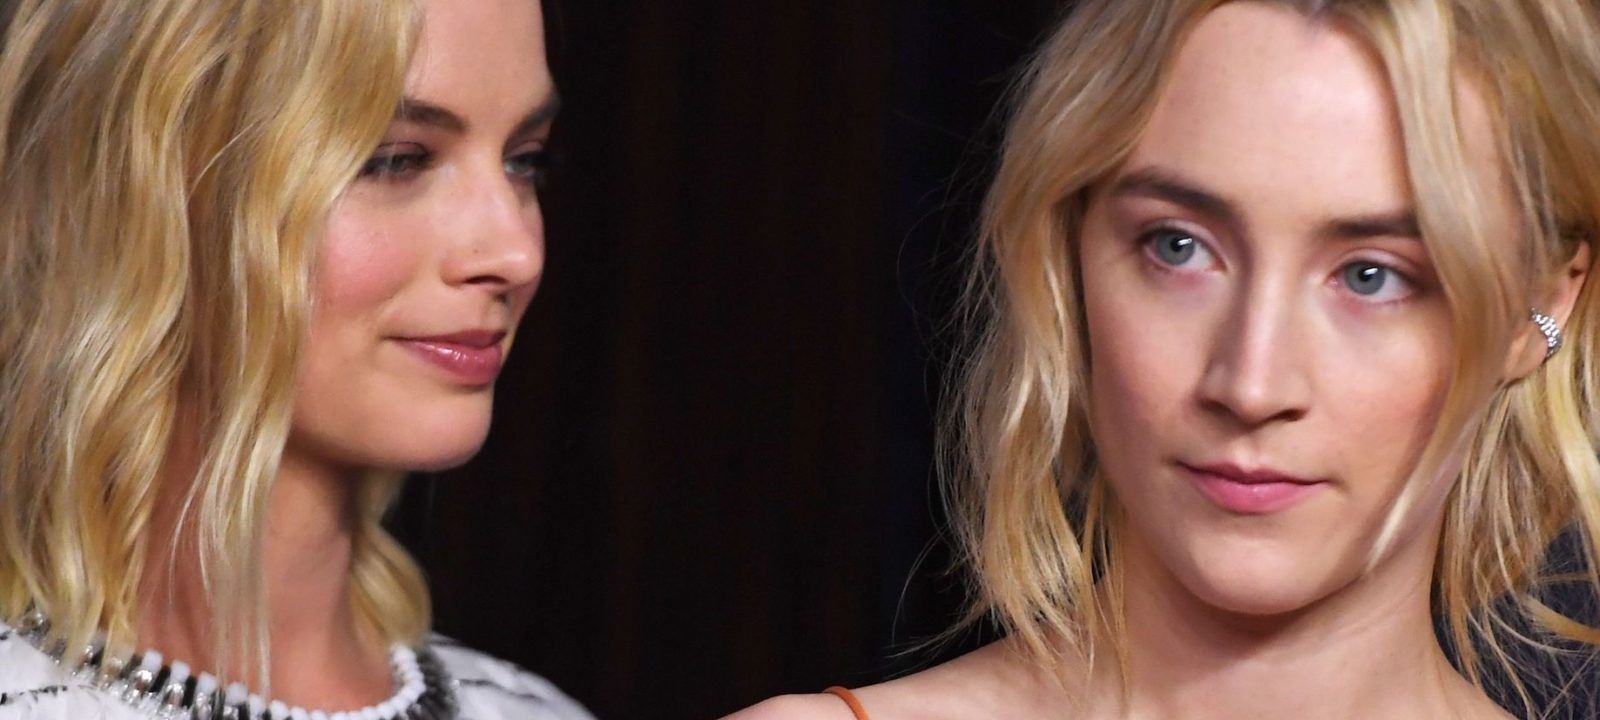 WATCH: Margot Robbie and Saoirse Ronan Battle it Out in 'Mary